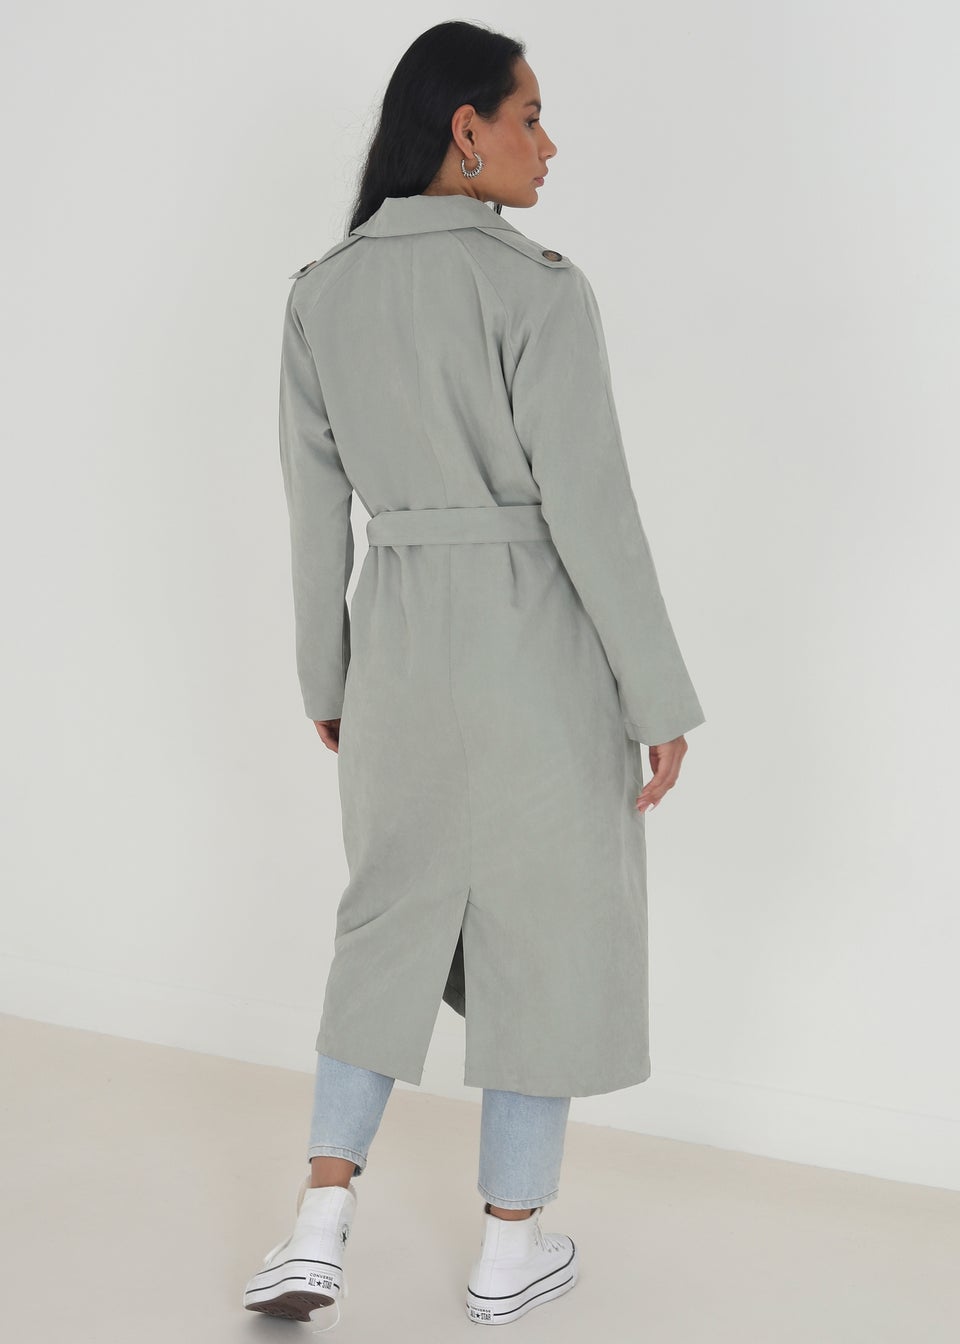 Brave Soul Soft Green Double-Breasted Longline Trench Coat with Raglan Sleeves